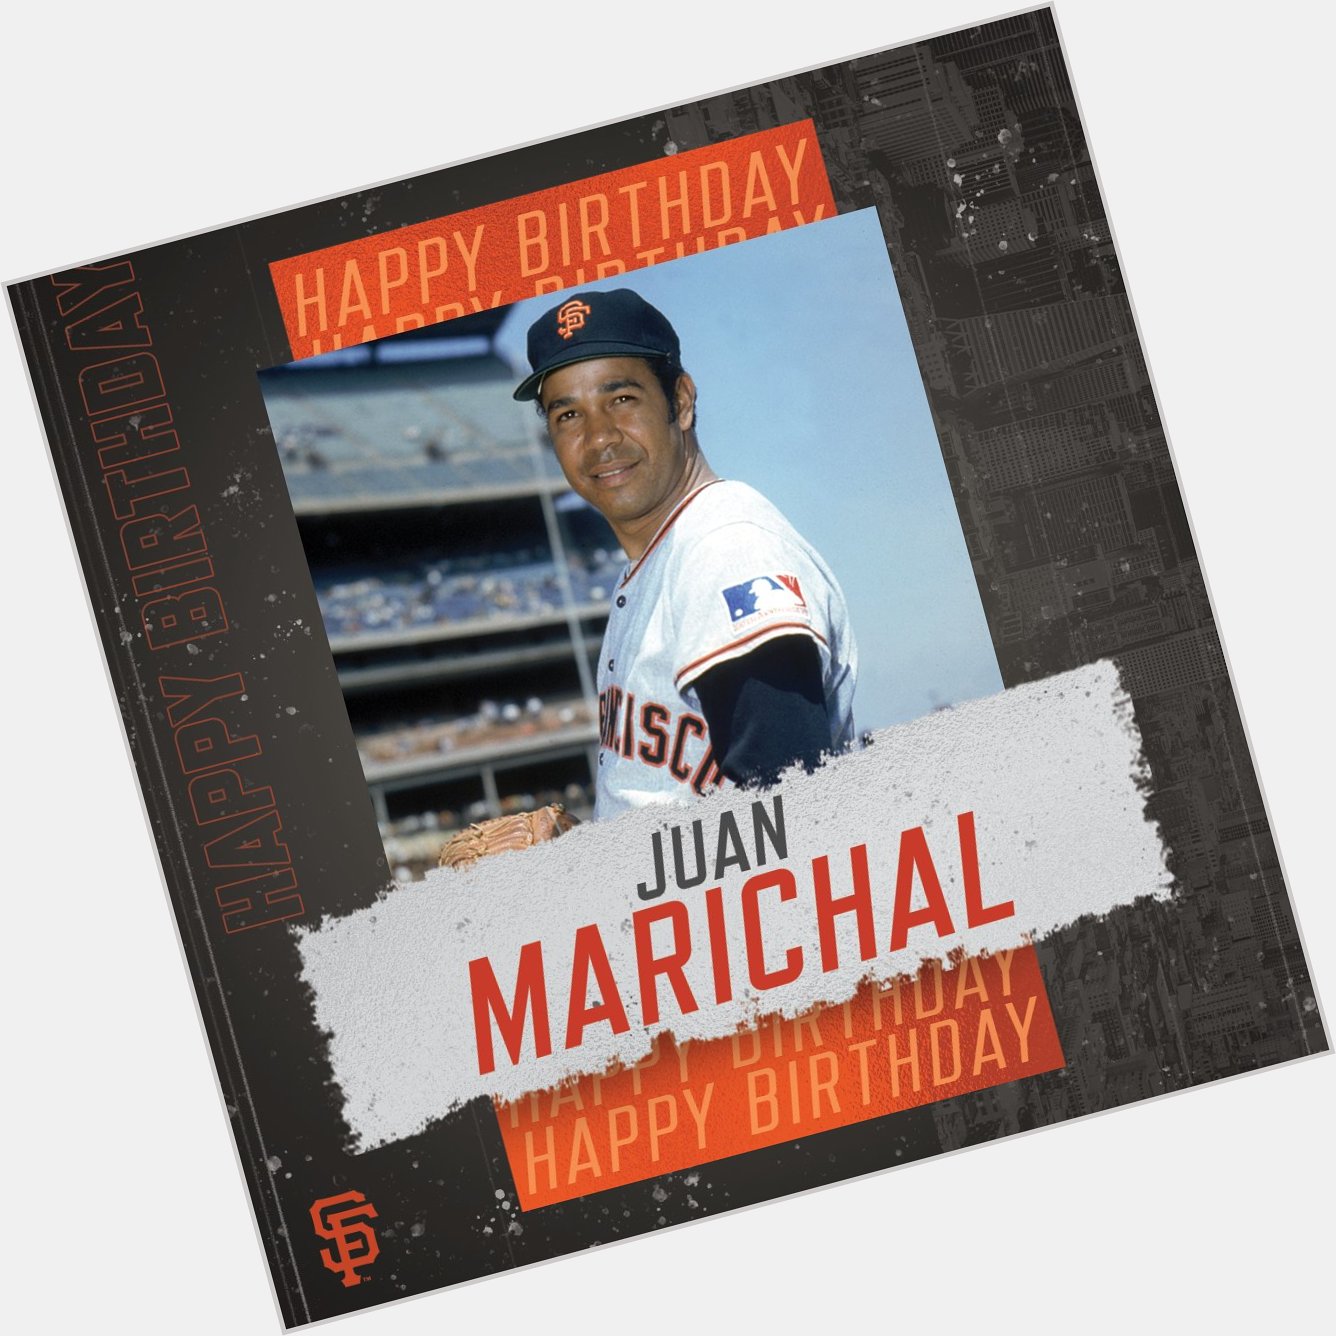 \"Happy birthday to and Hall-of-Famer, Juan Marichal! 